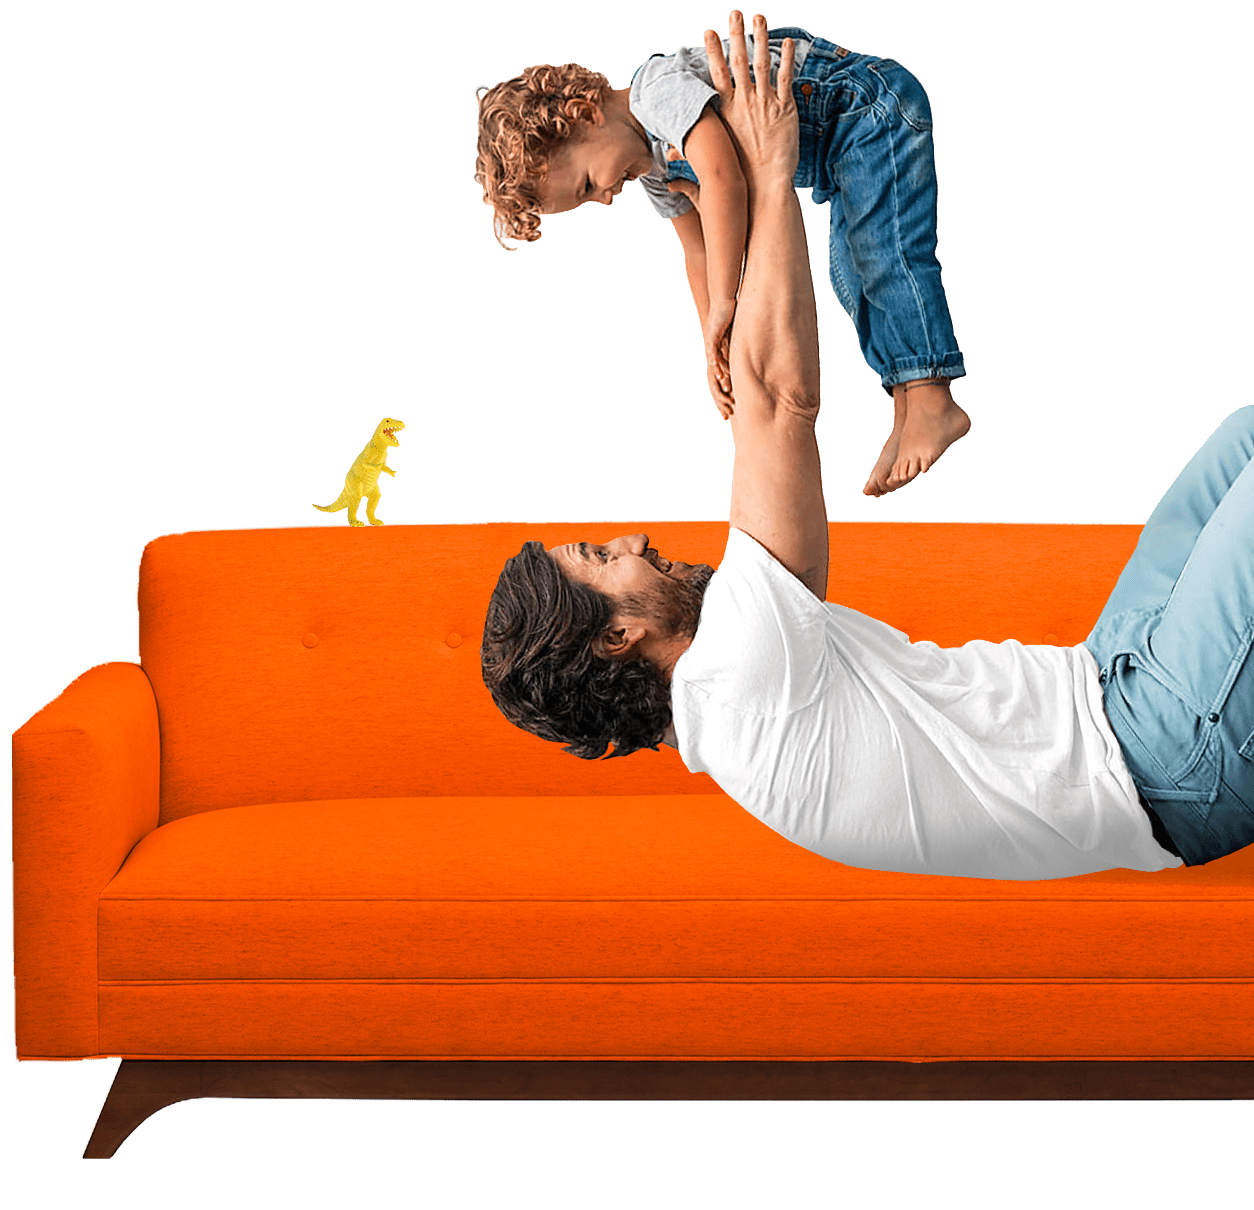 A man lying on an orange couch plays with a toddler